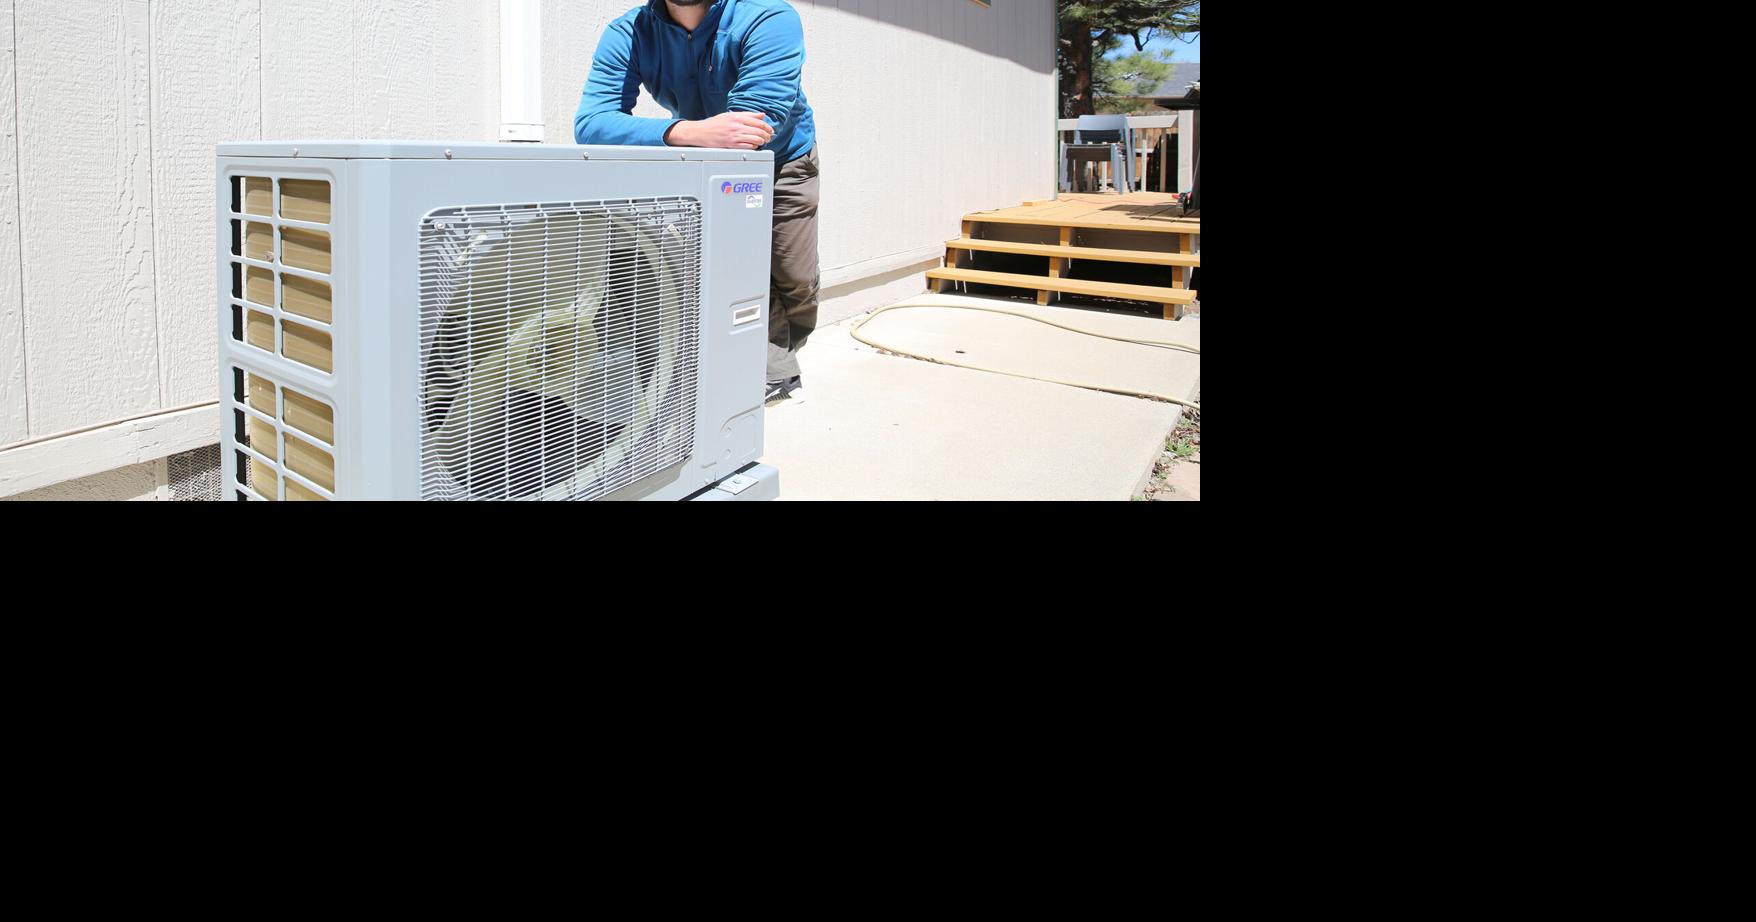 Flagstaff warms up to climate-friendly heat pumps | Local News ...